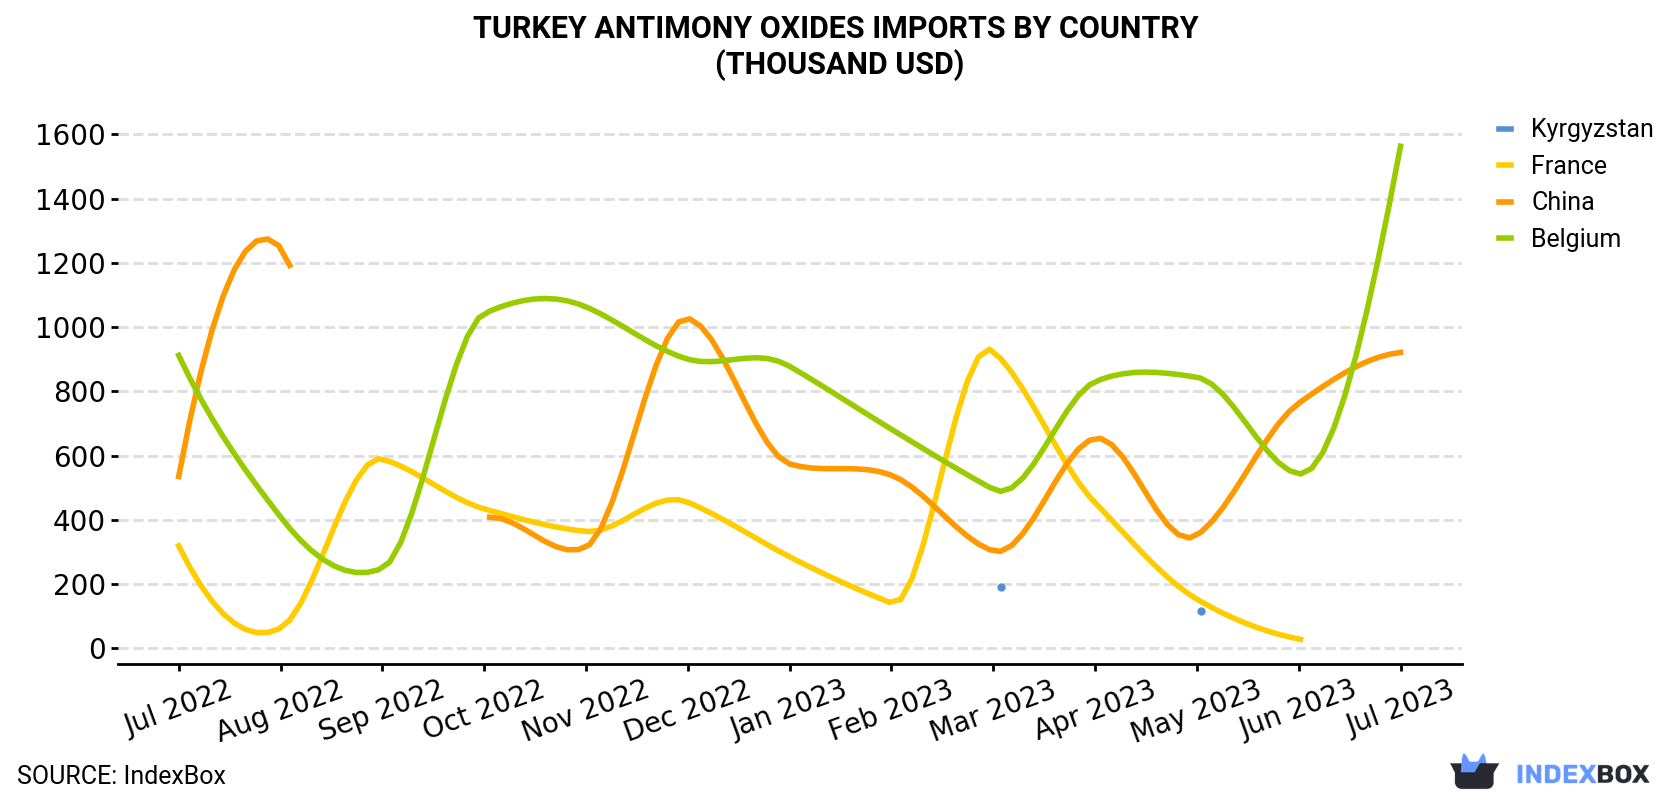 Turkey Antimony Oxides Imports By Country (Thousand USD)